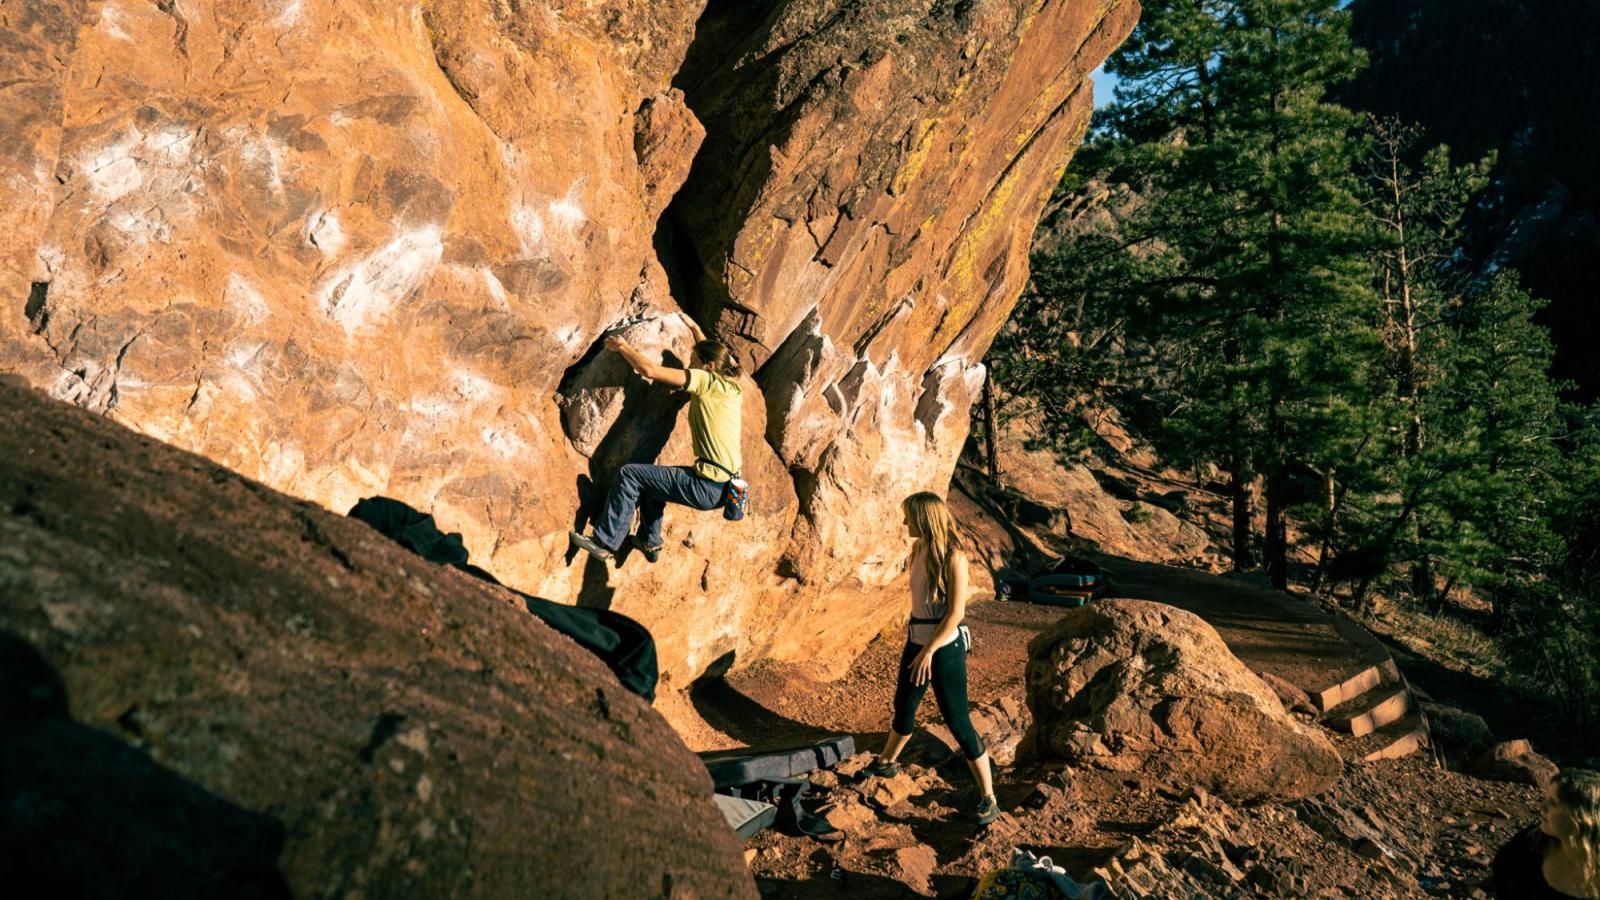 Golden hour shot of female climber in green struggling to hold on as her friend watches from behind